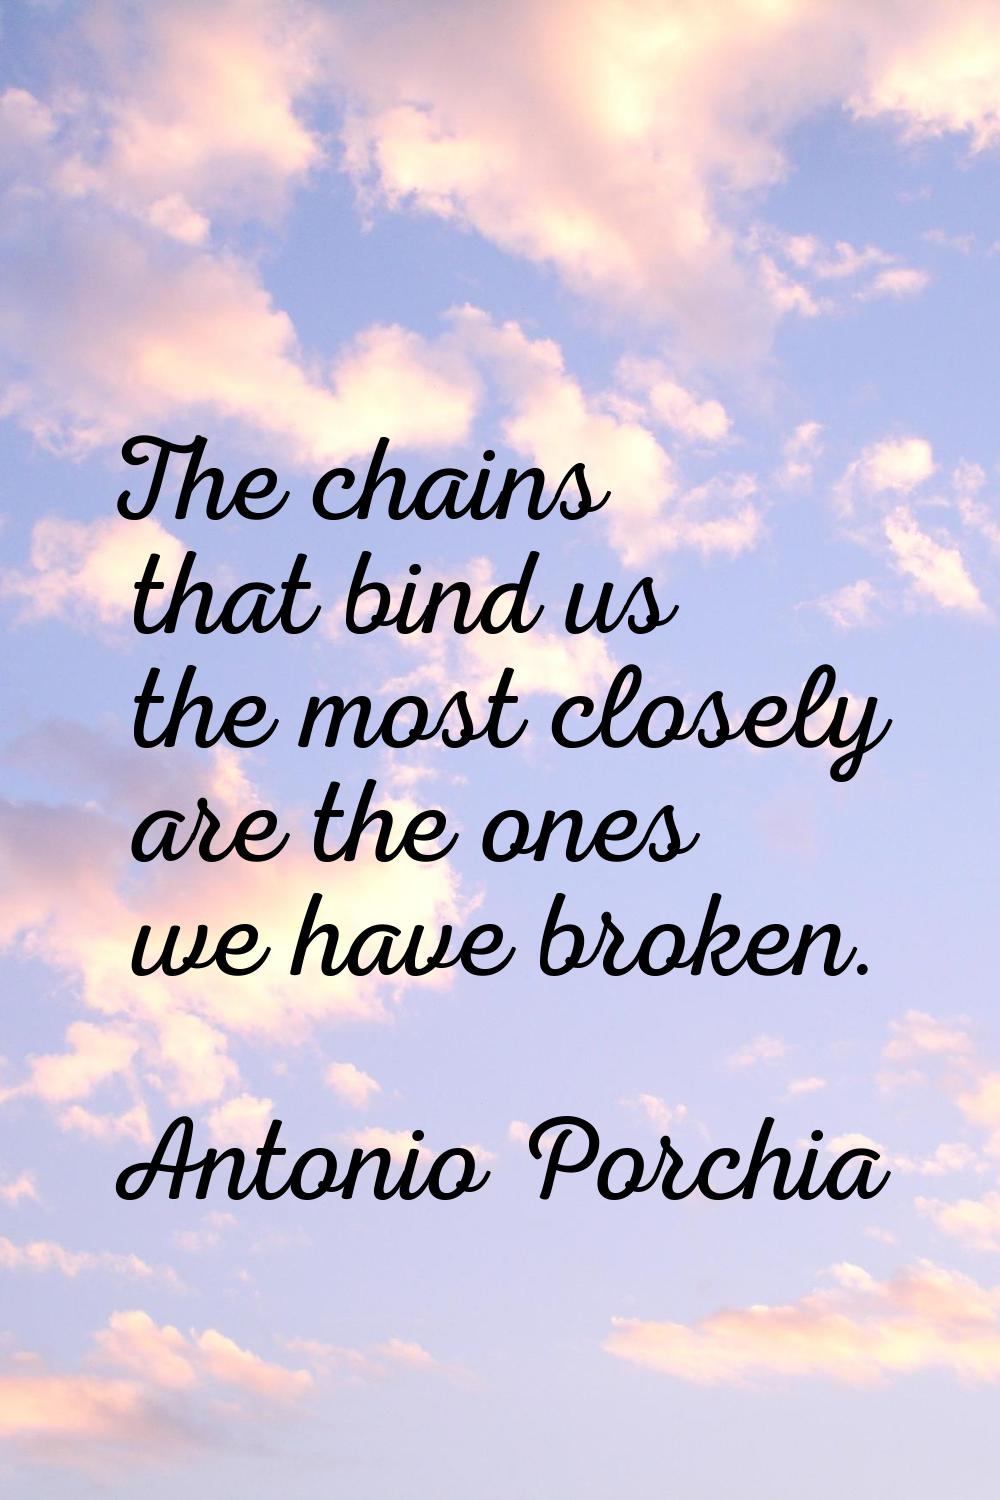 The chains that bind us the most closely are the ones we have broken.